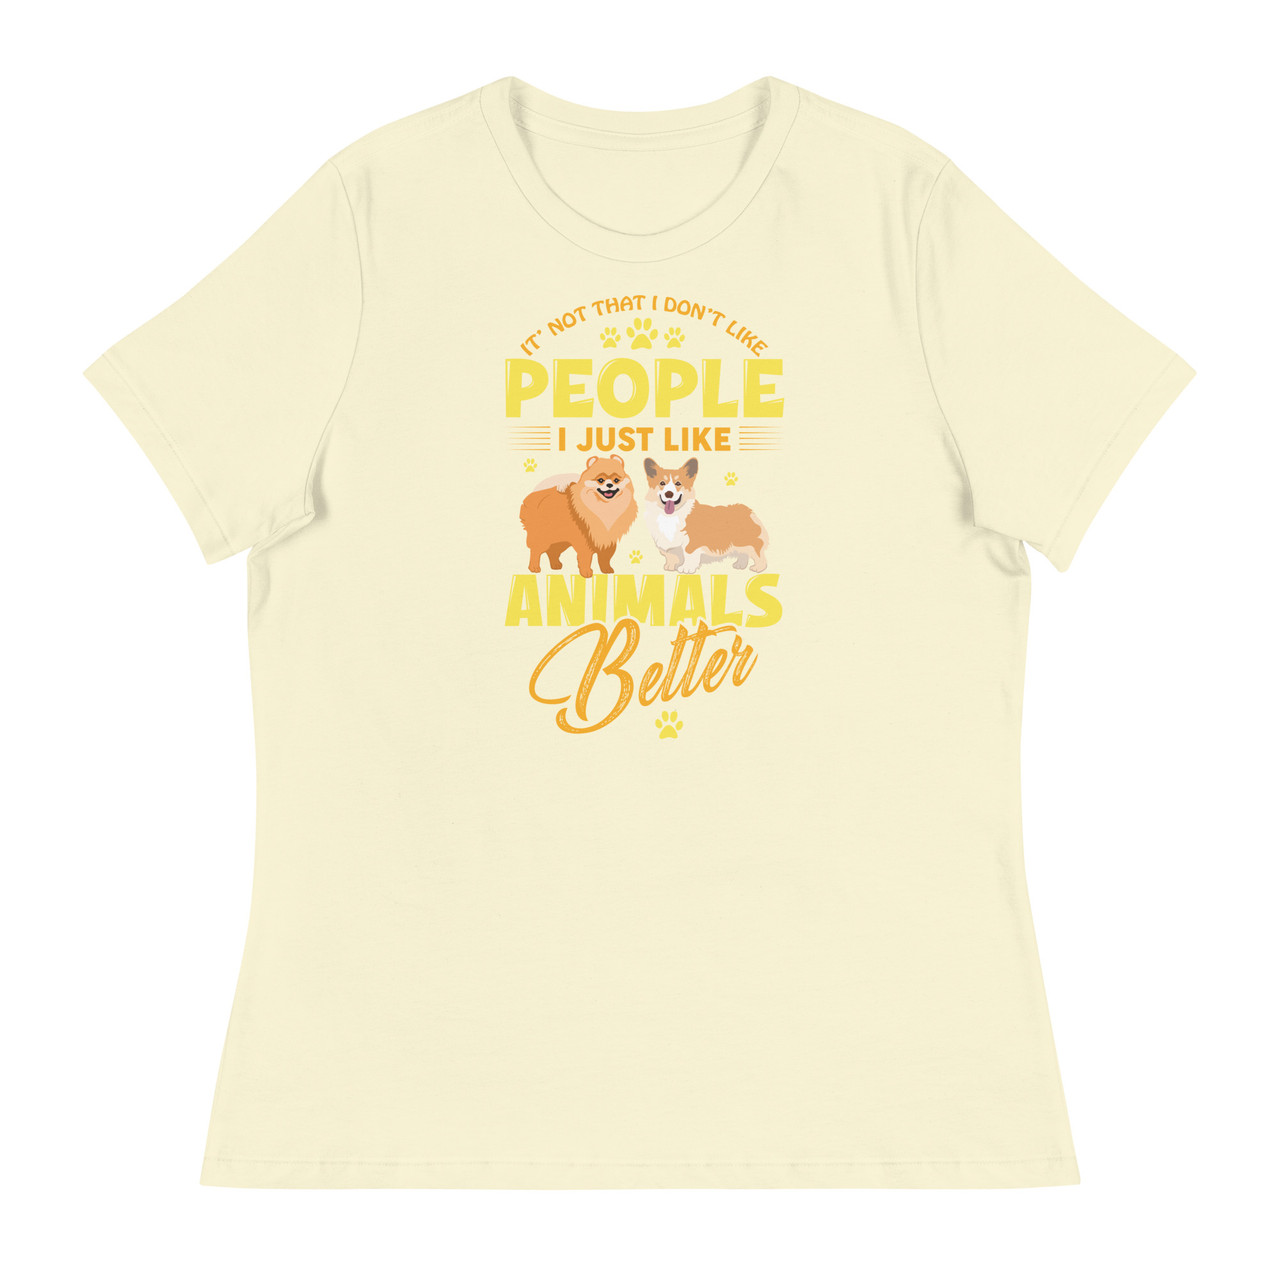 It's Not That I Don't Like People Women's Relaxed T-Shirt - Bella + Canvas 6400 